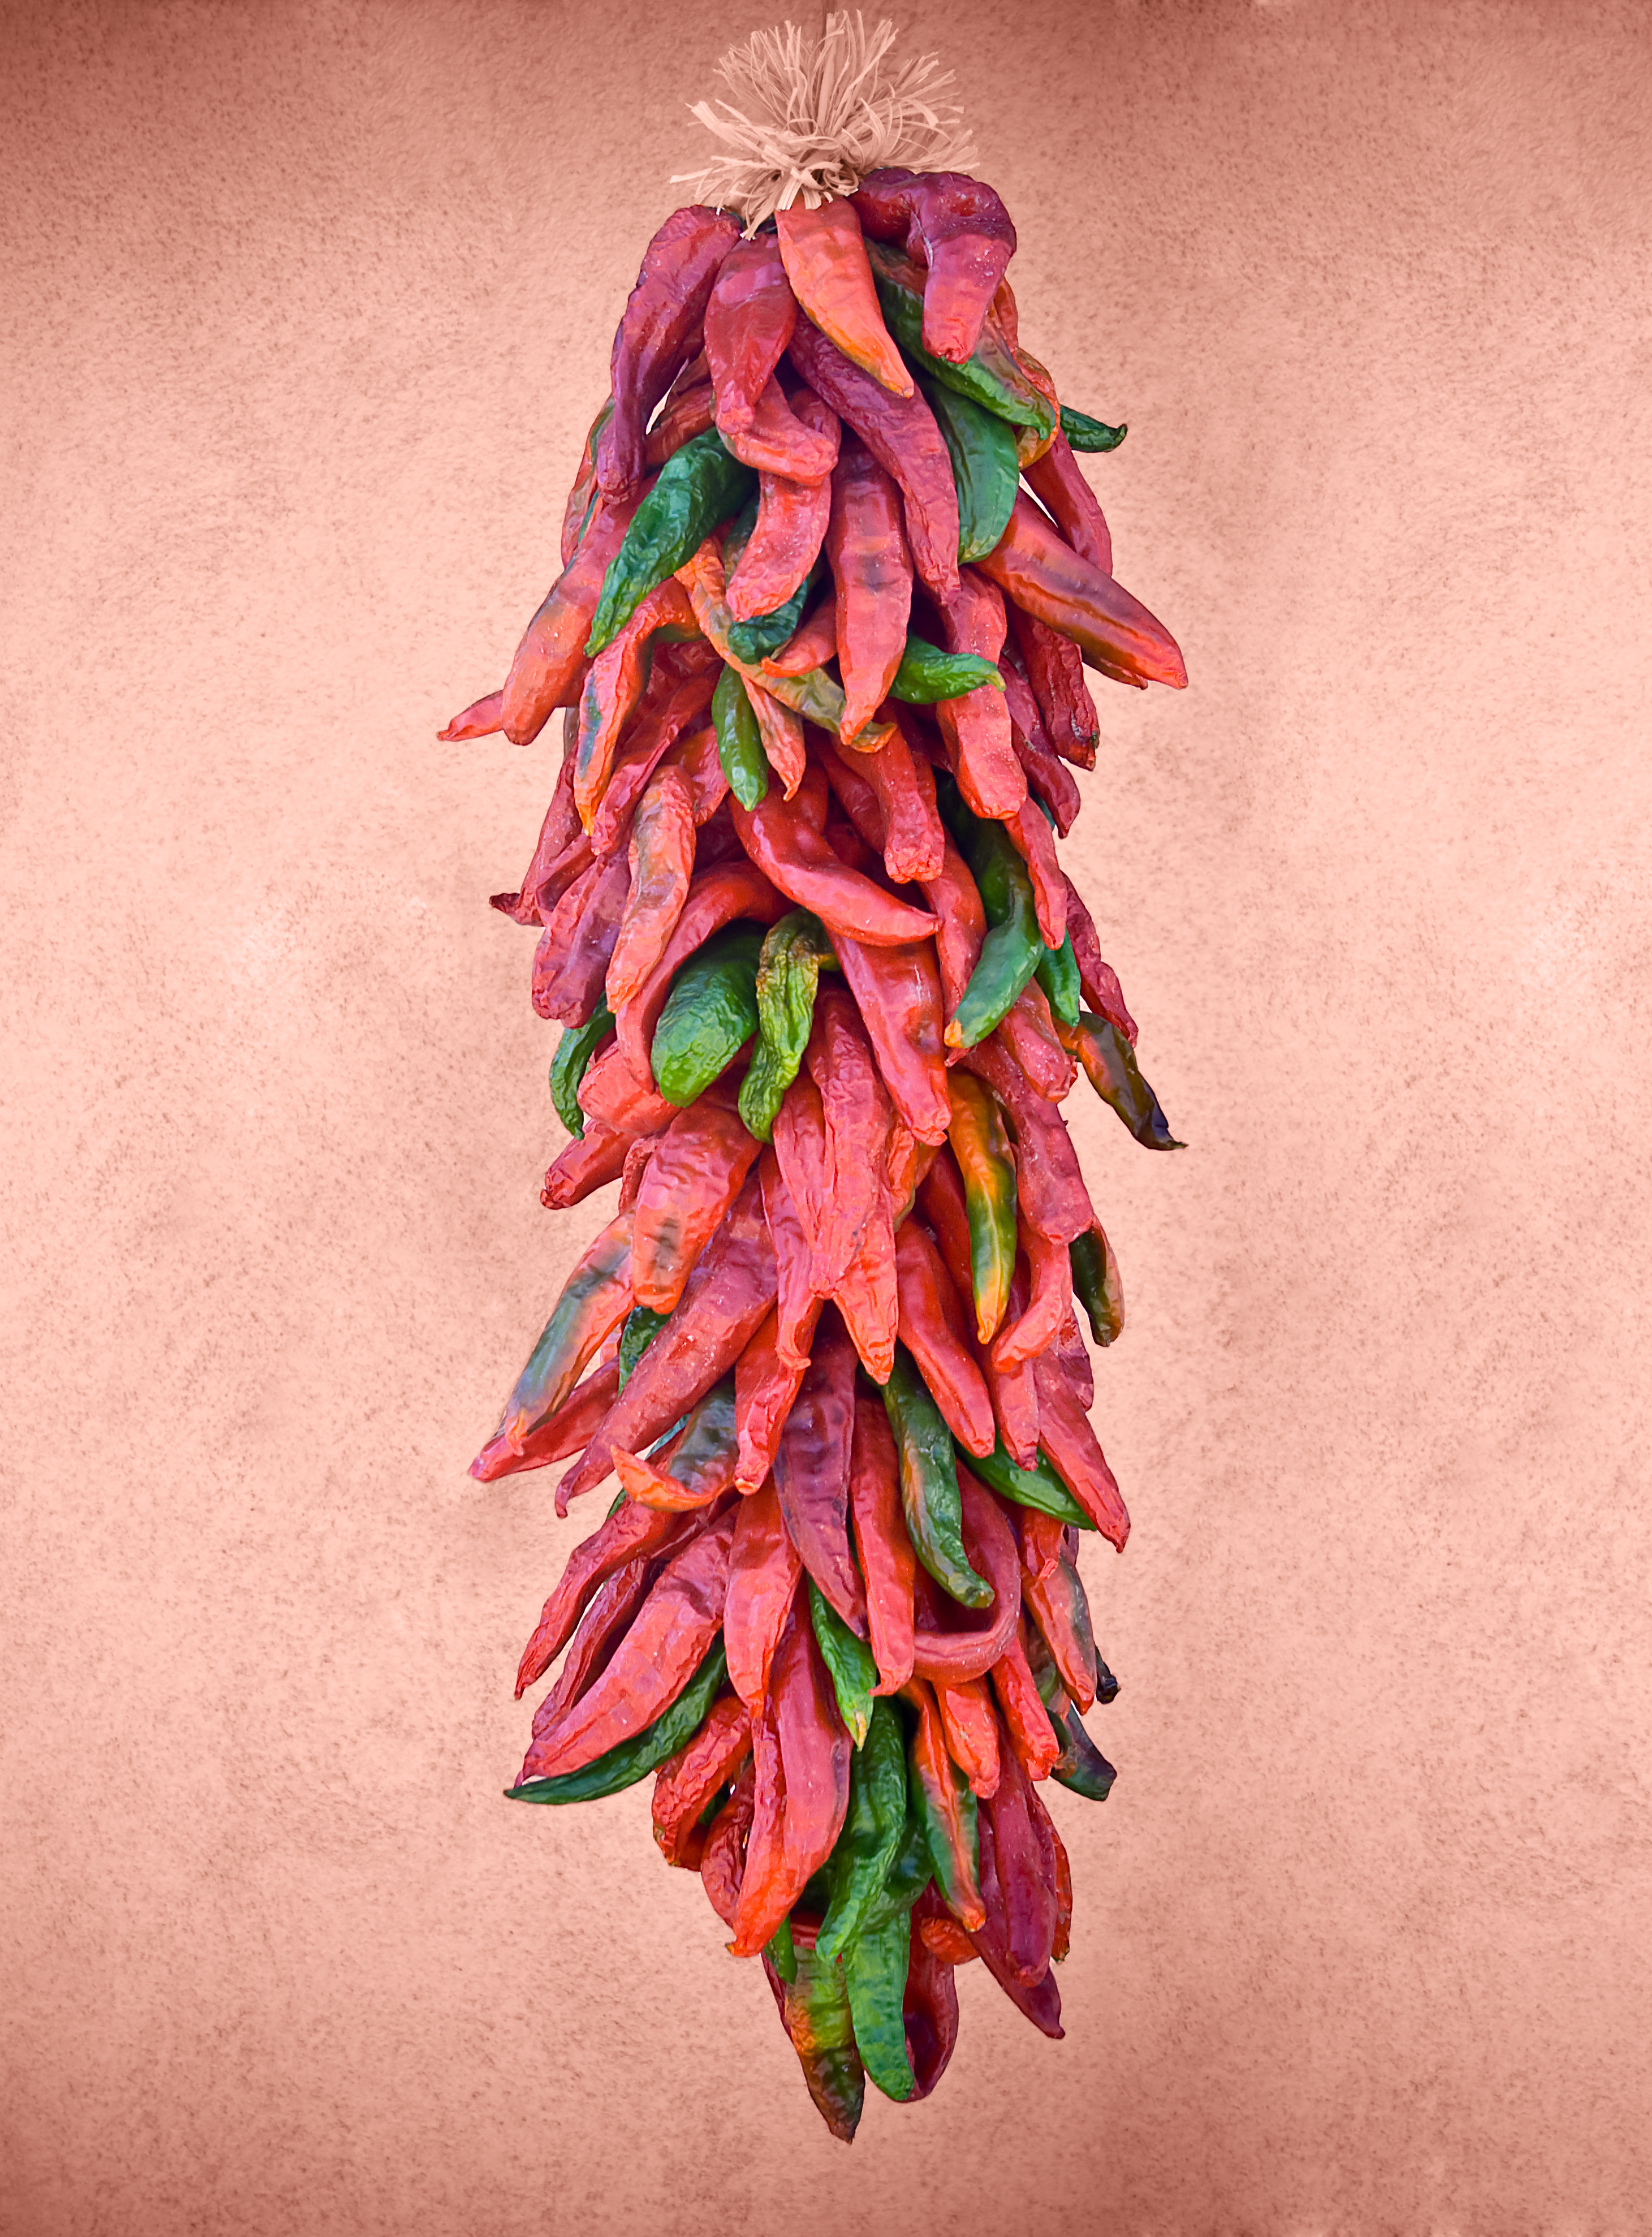 Hanging chilis, Adobe, Many, Stock, Spicy, HQ Photo